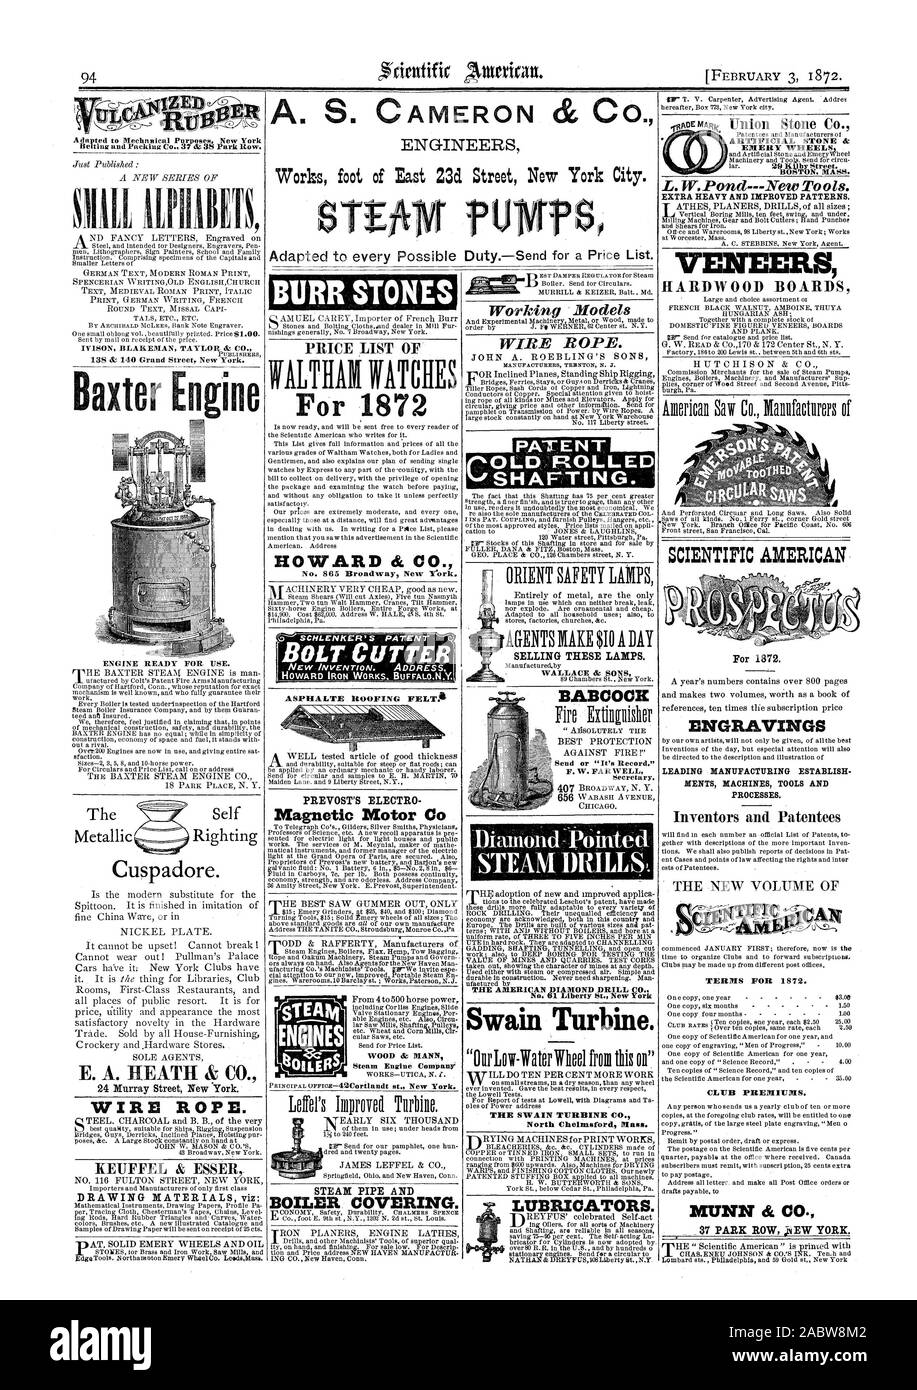 IYISON BLAKEMAN TAYLOR & CO. Baxter Engine ENGINE READY FOR USE. Cuspadore. WIRE ROPE. K.EUFFEL & ESSER. BURR STONES PRICE LIST OF For 1872 HOWARD ti CO. No. 865 Broadway New rork. BOLT CUTTER ASPHALT ROOFING FELTA Magnetic Motor C STEAM PIPE AND BOILER COVERING. WIRE ROPE. ORIENT SAFETY LAMPS SELLING THESE LAMPS. WALLACE & SONS BABCOCK AllSOLUTELY THE Send or 'It's Record.' Diamond - Pointed THE AMERICAN DIAMOND DRILL CO. No. 61 Liberty St. New York Swain Turbine ARTIFICIAL STONE & EMERY WHEELS BOSTON MASS. L.W.PondNew Tools. EXTRA HEAVY AND IMPROVED PATTERNS. VENEERS HARDWOOD BOARDS A. S Stock Photo